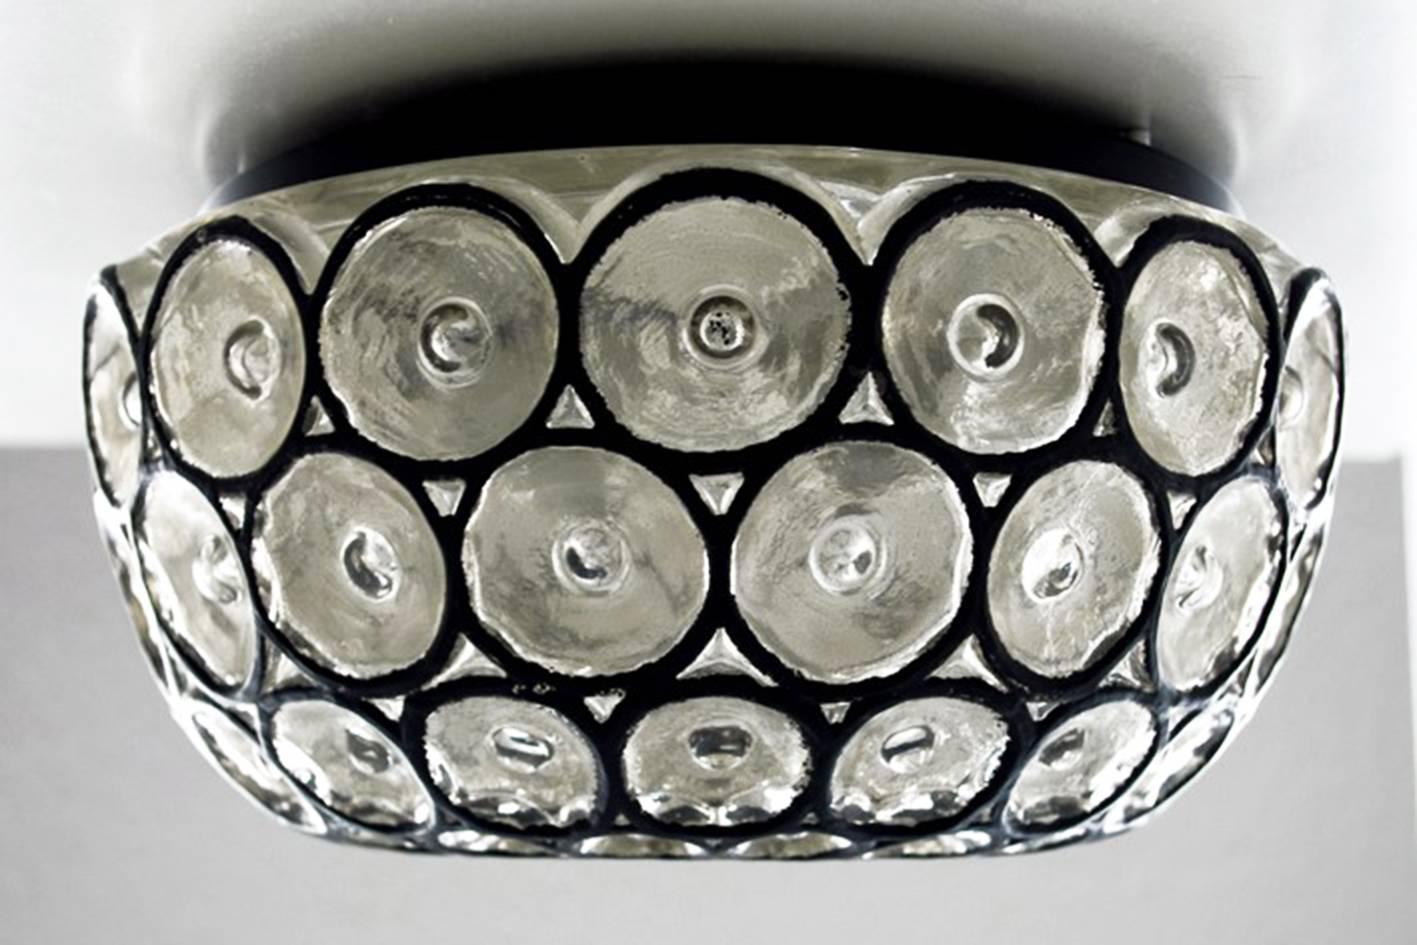 Rare Iron and glass flush mount by Limburg. 
Germany, 1960s
Measures: Diameter 10 in, height 6 in, sockets: 1x E27.

Or smaller version available
Measures: Diameter 7.9 in, height 4.3 in, sockets: 1x E27.